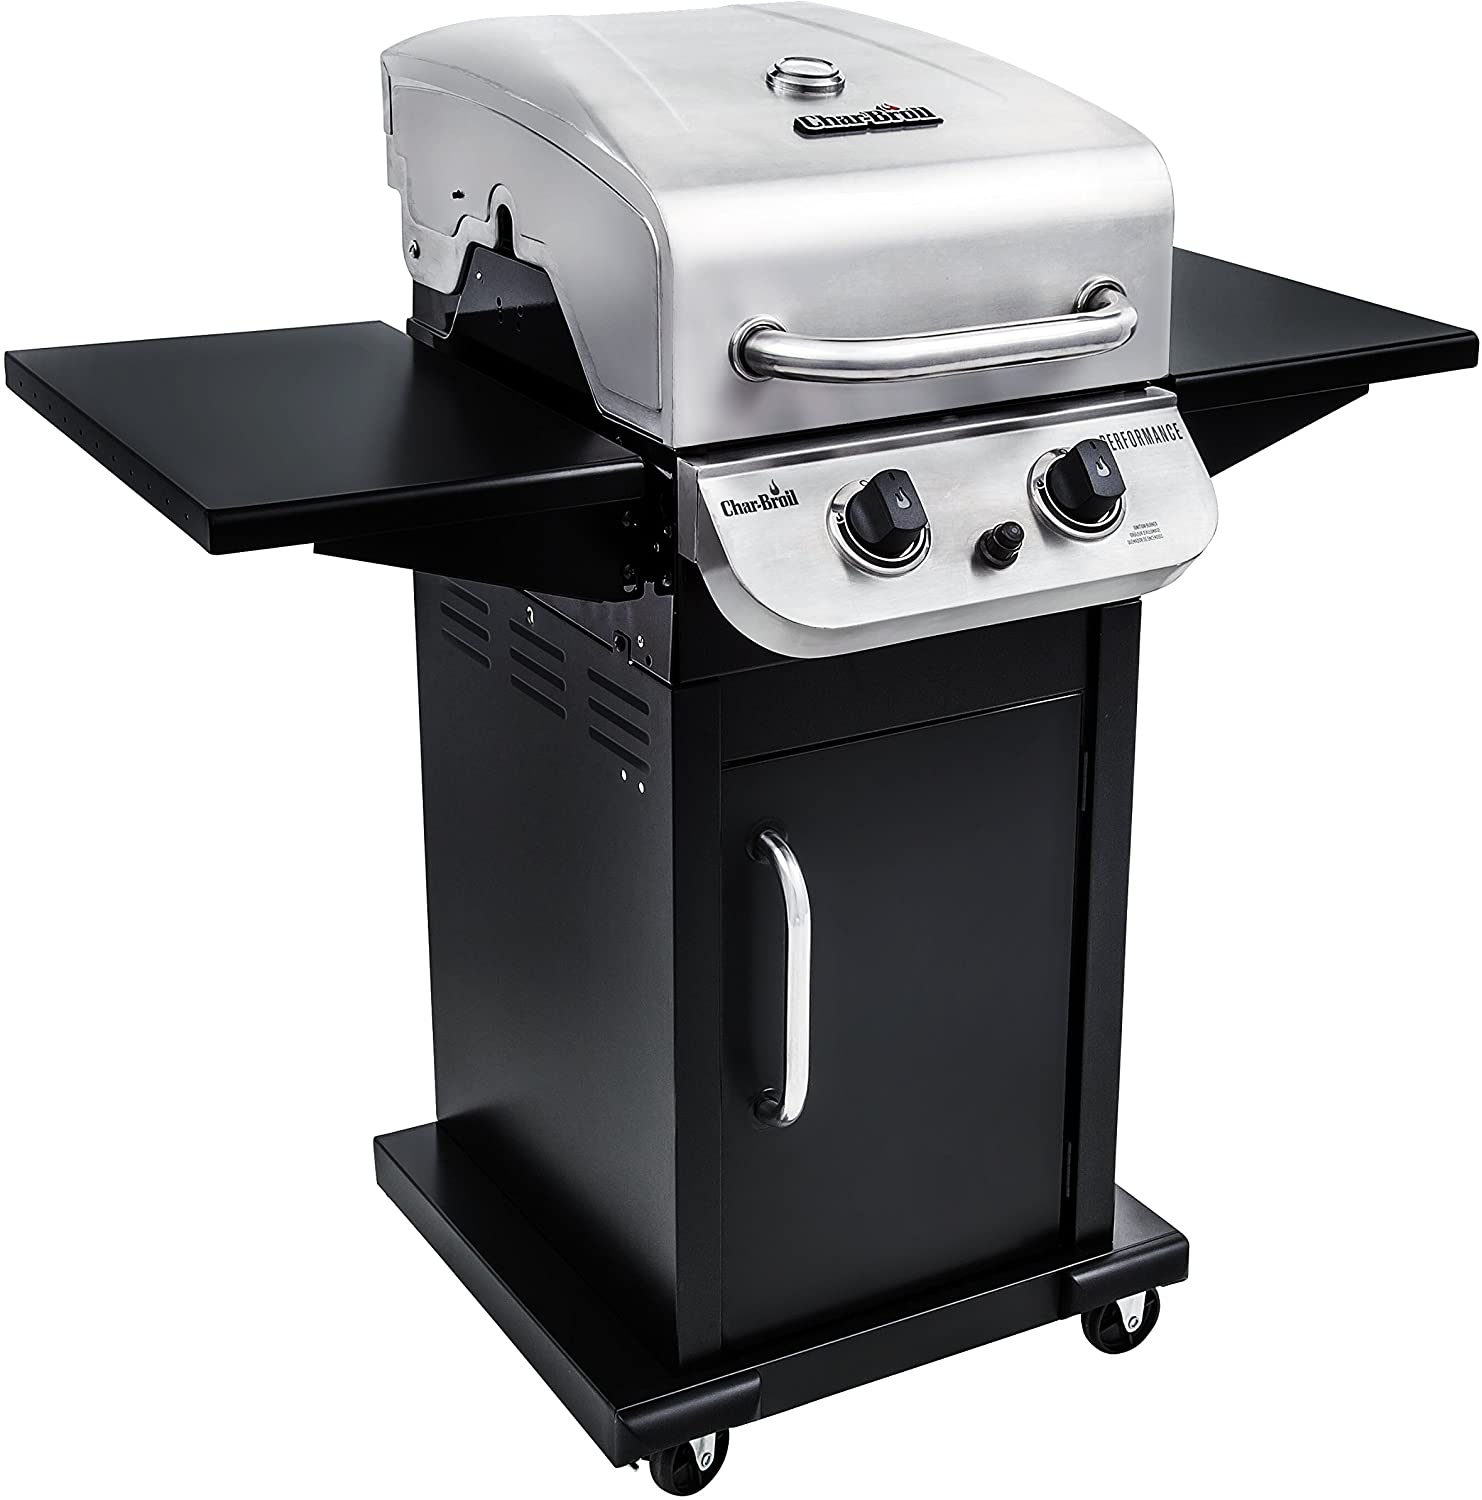 Char Broil Performance Series 2 Burner Gas Grill review